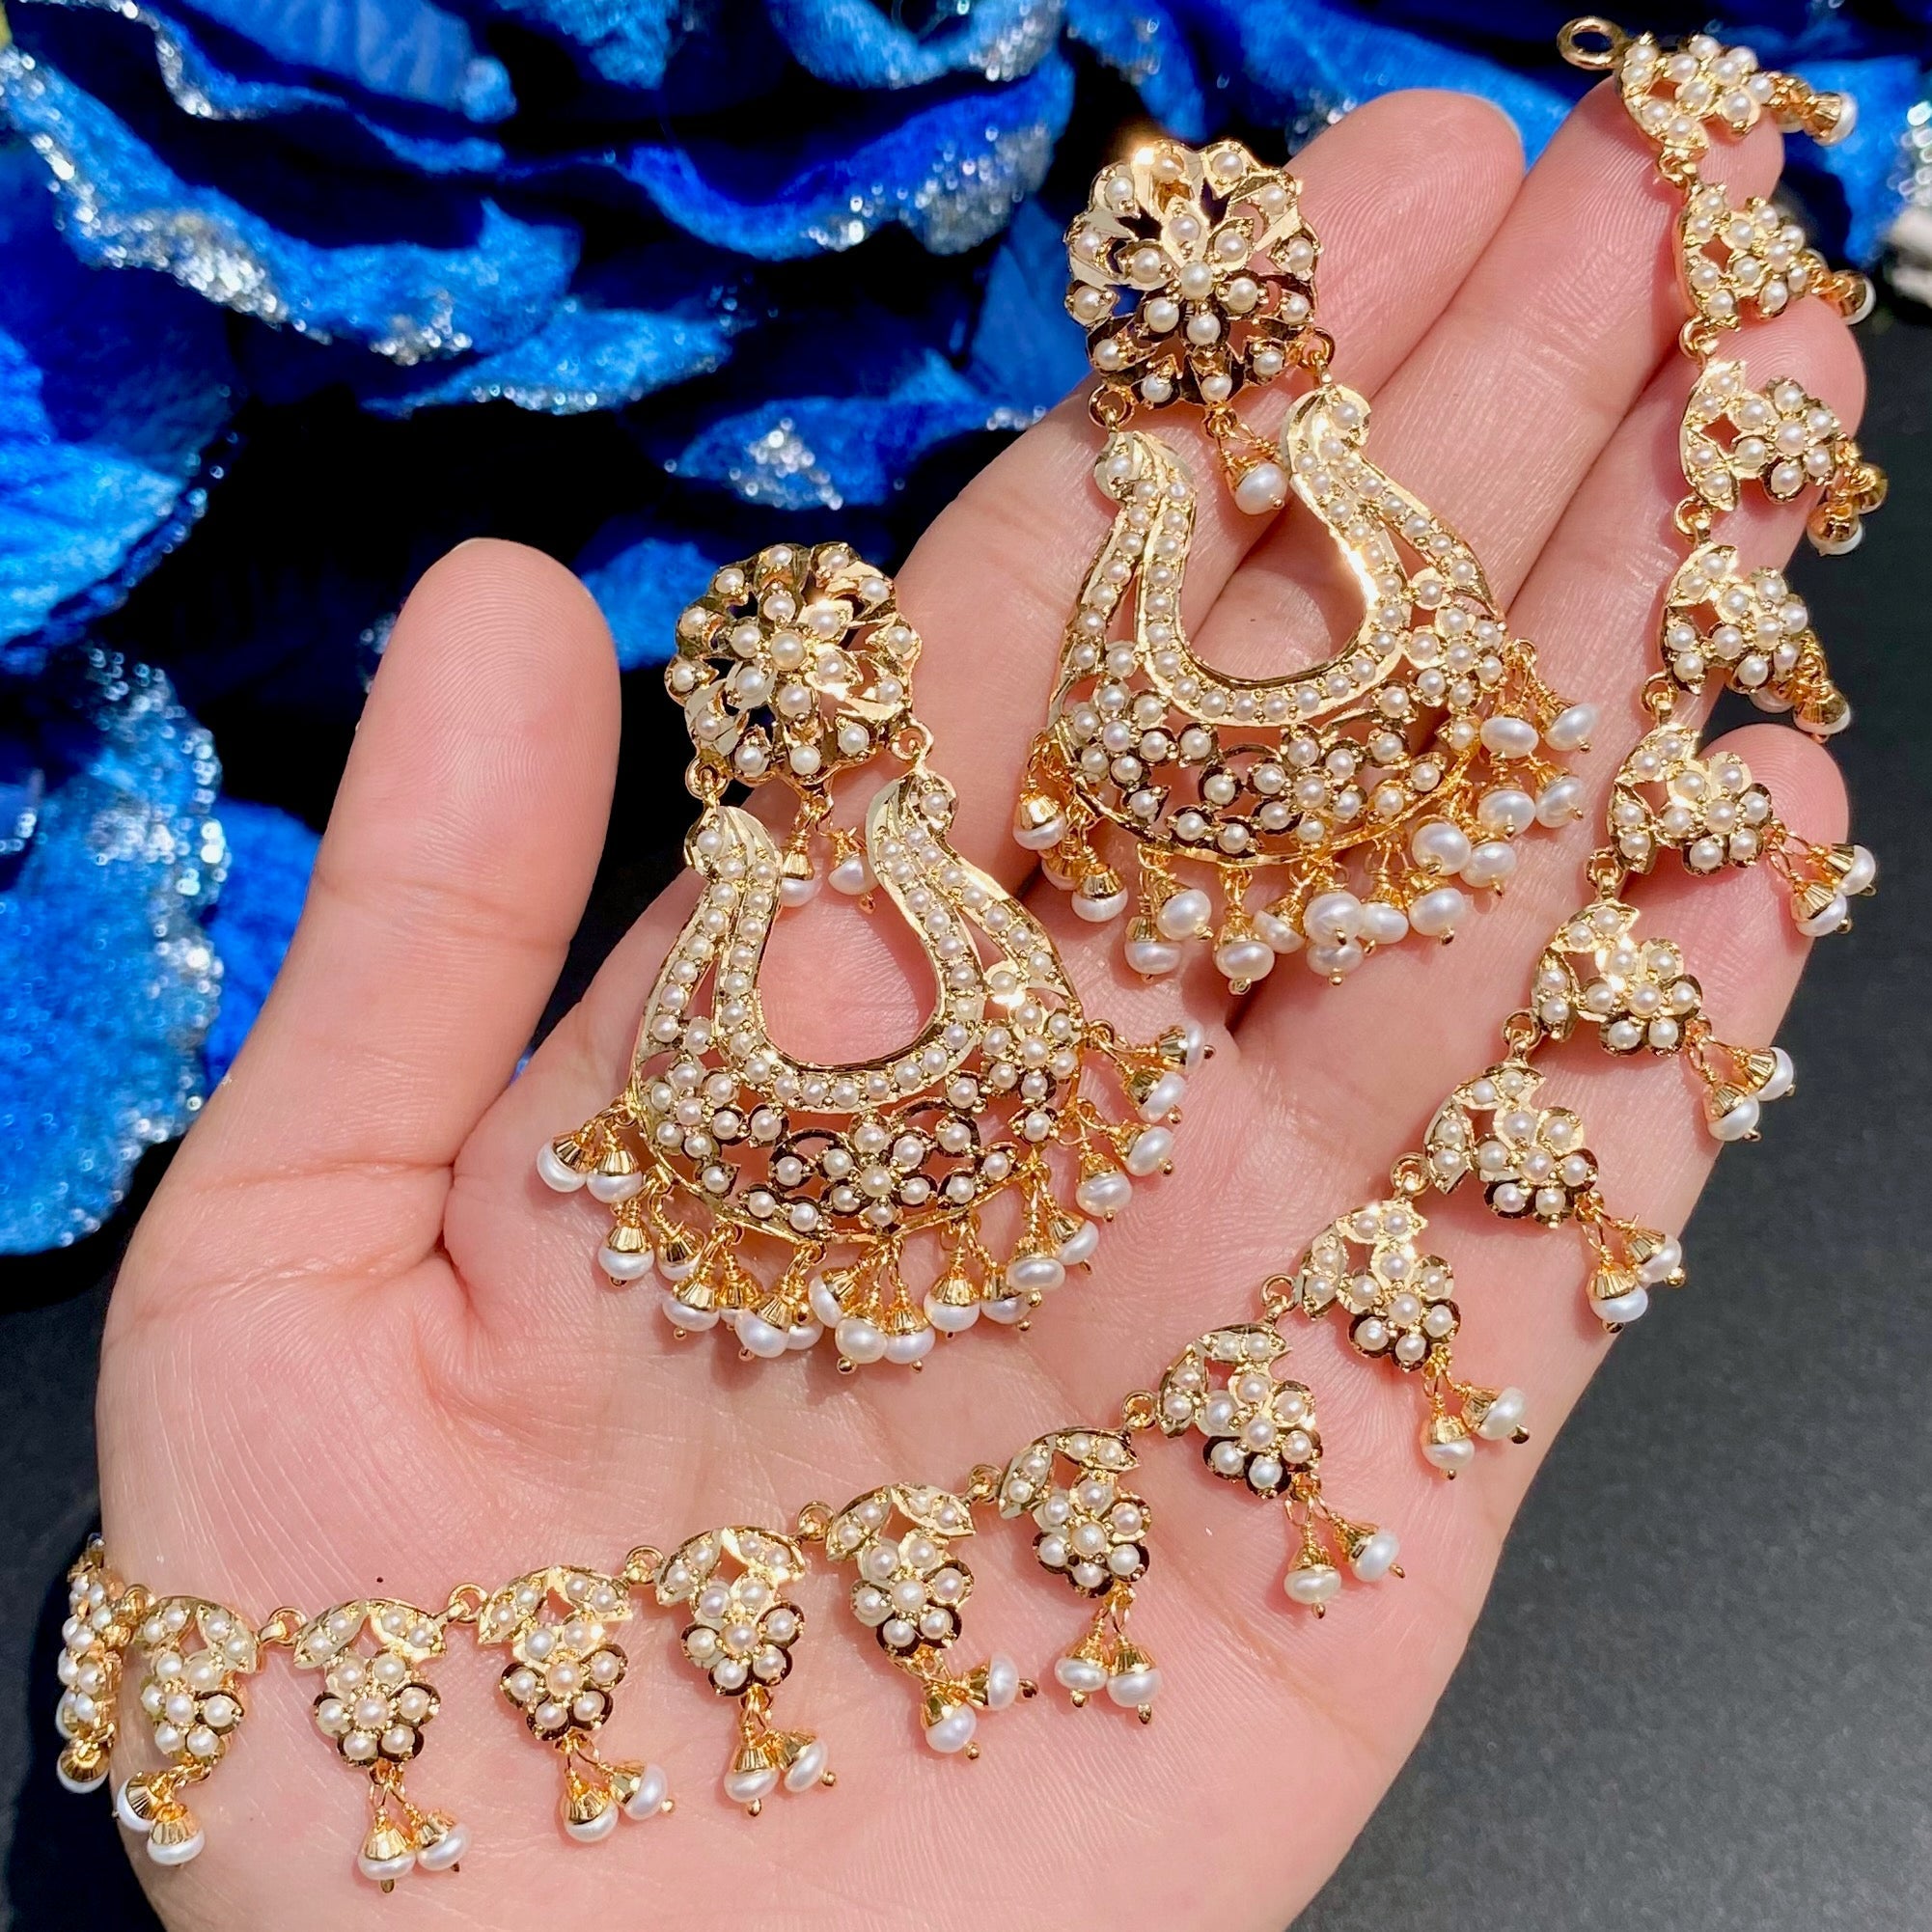 Freshwater Pearl Jewelry | Heritage Pakistani Handcraft | Gold Plated Silver